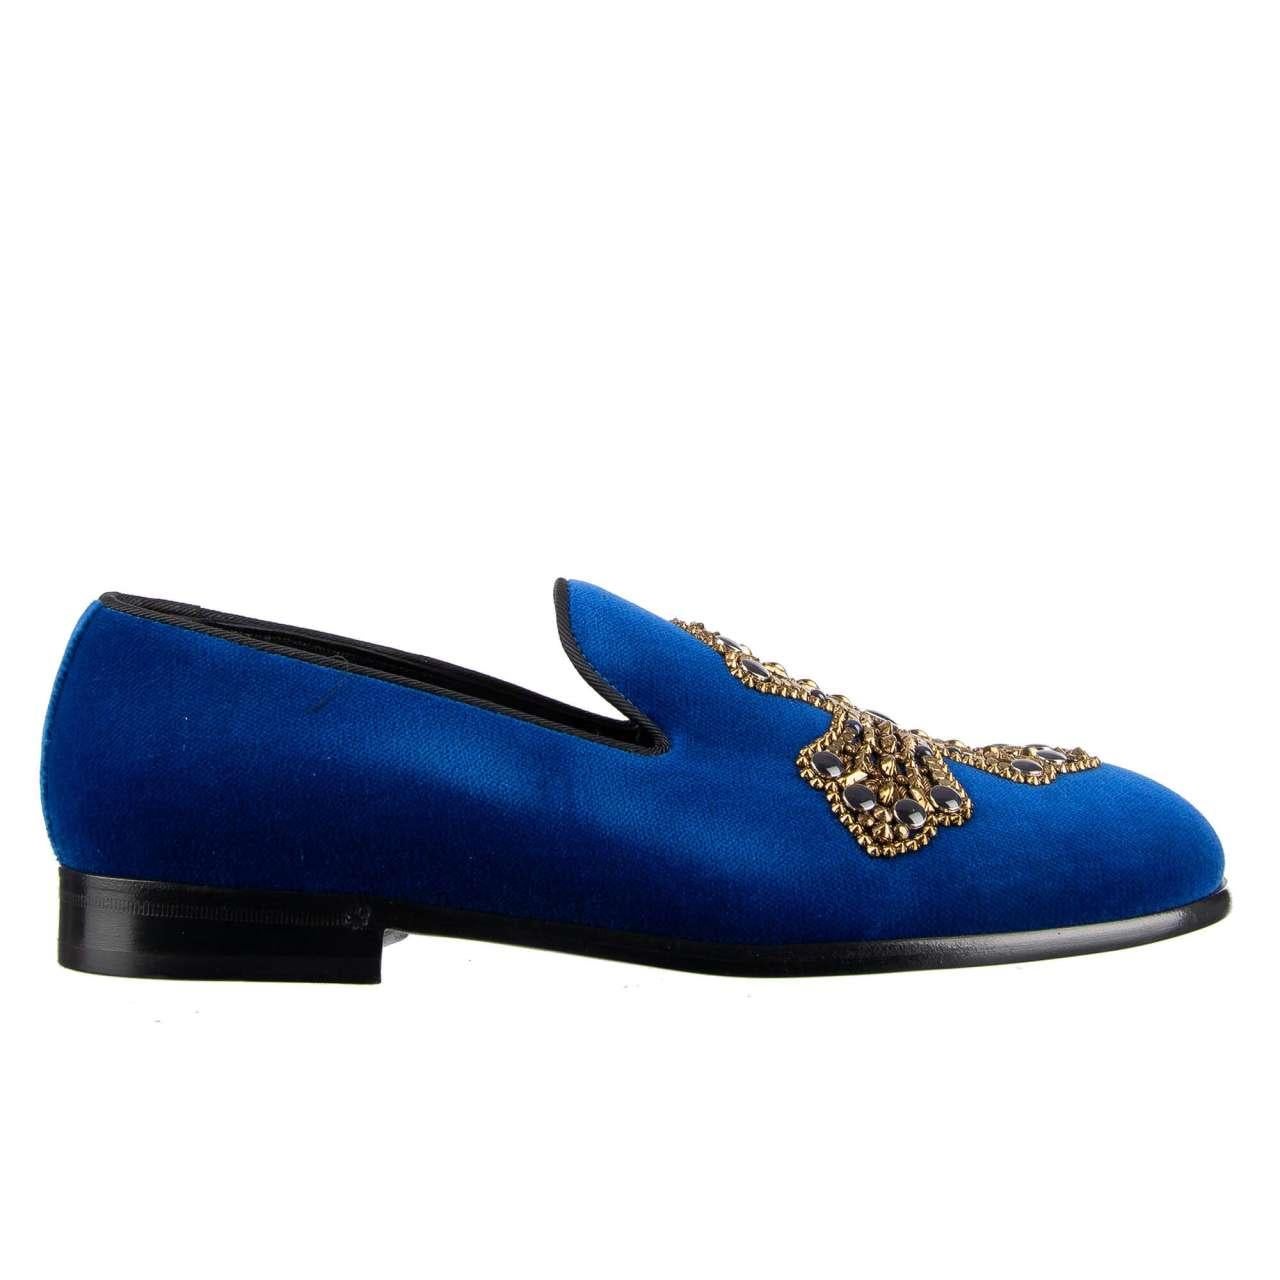 Dolce & Gabbana - Cross Embroidered Loafer MILANO Blue EUR 44 For Sale 1